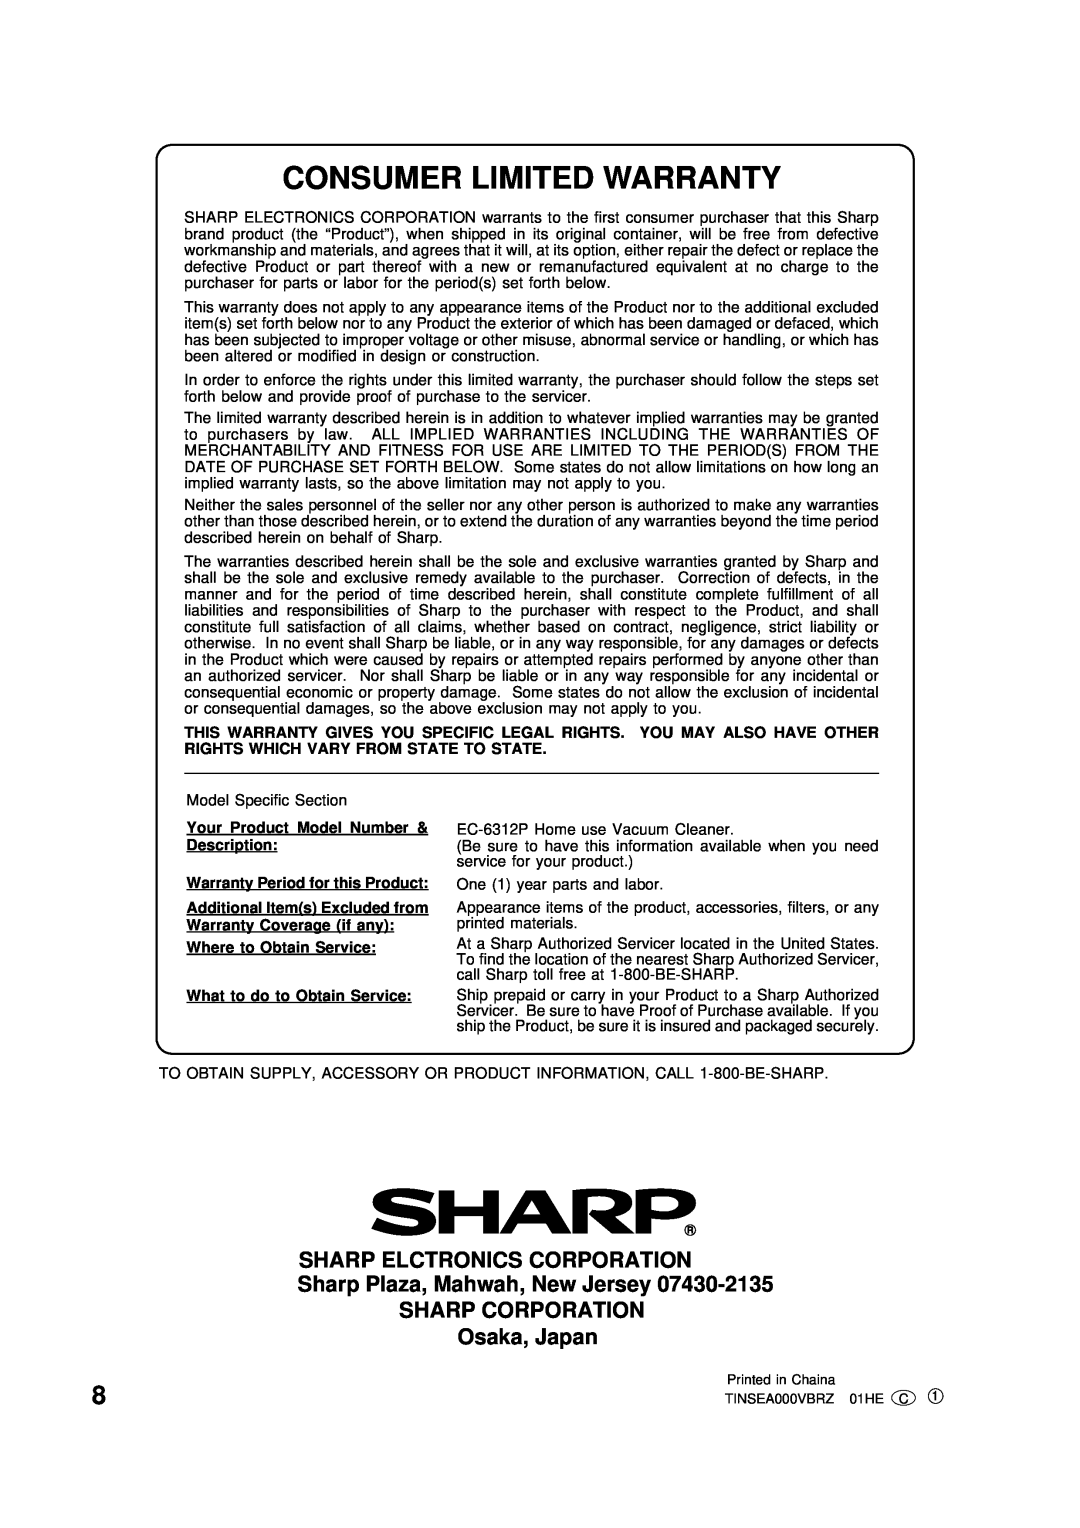 Sharp EC-6312P Consumer Limited Warranty, Your Product Model Number & Description, Warranty Period for this Product 